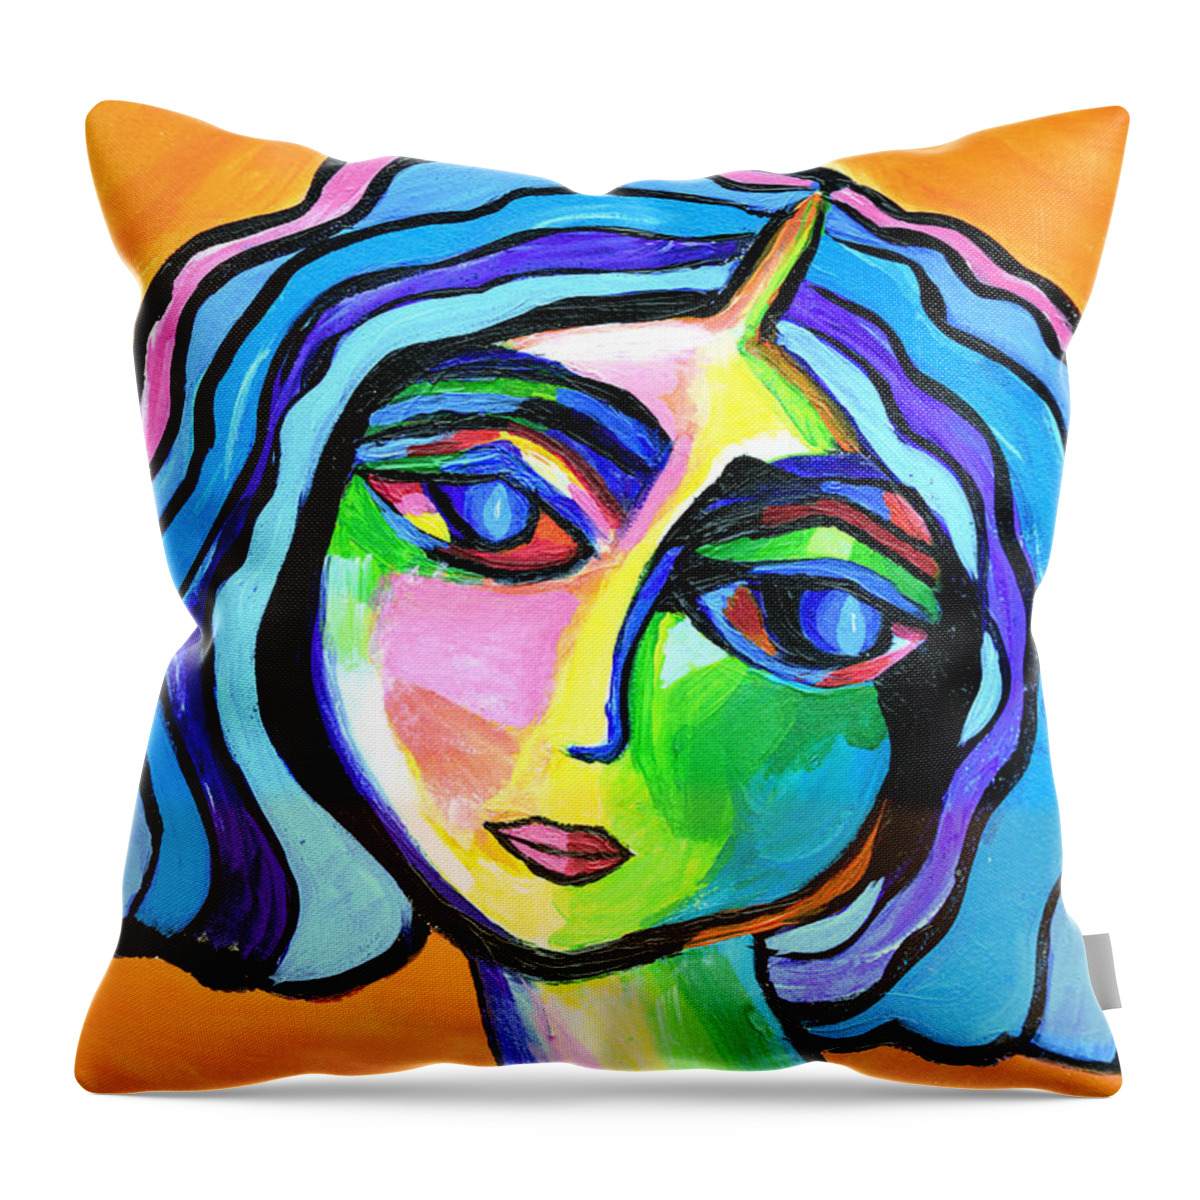 Abstract Throw Pillow featuring the painting Abstract B32916 by Mas Art Studio